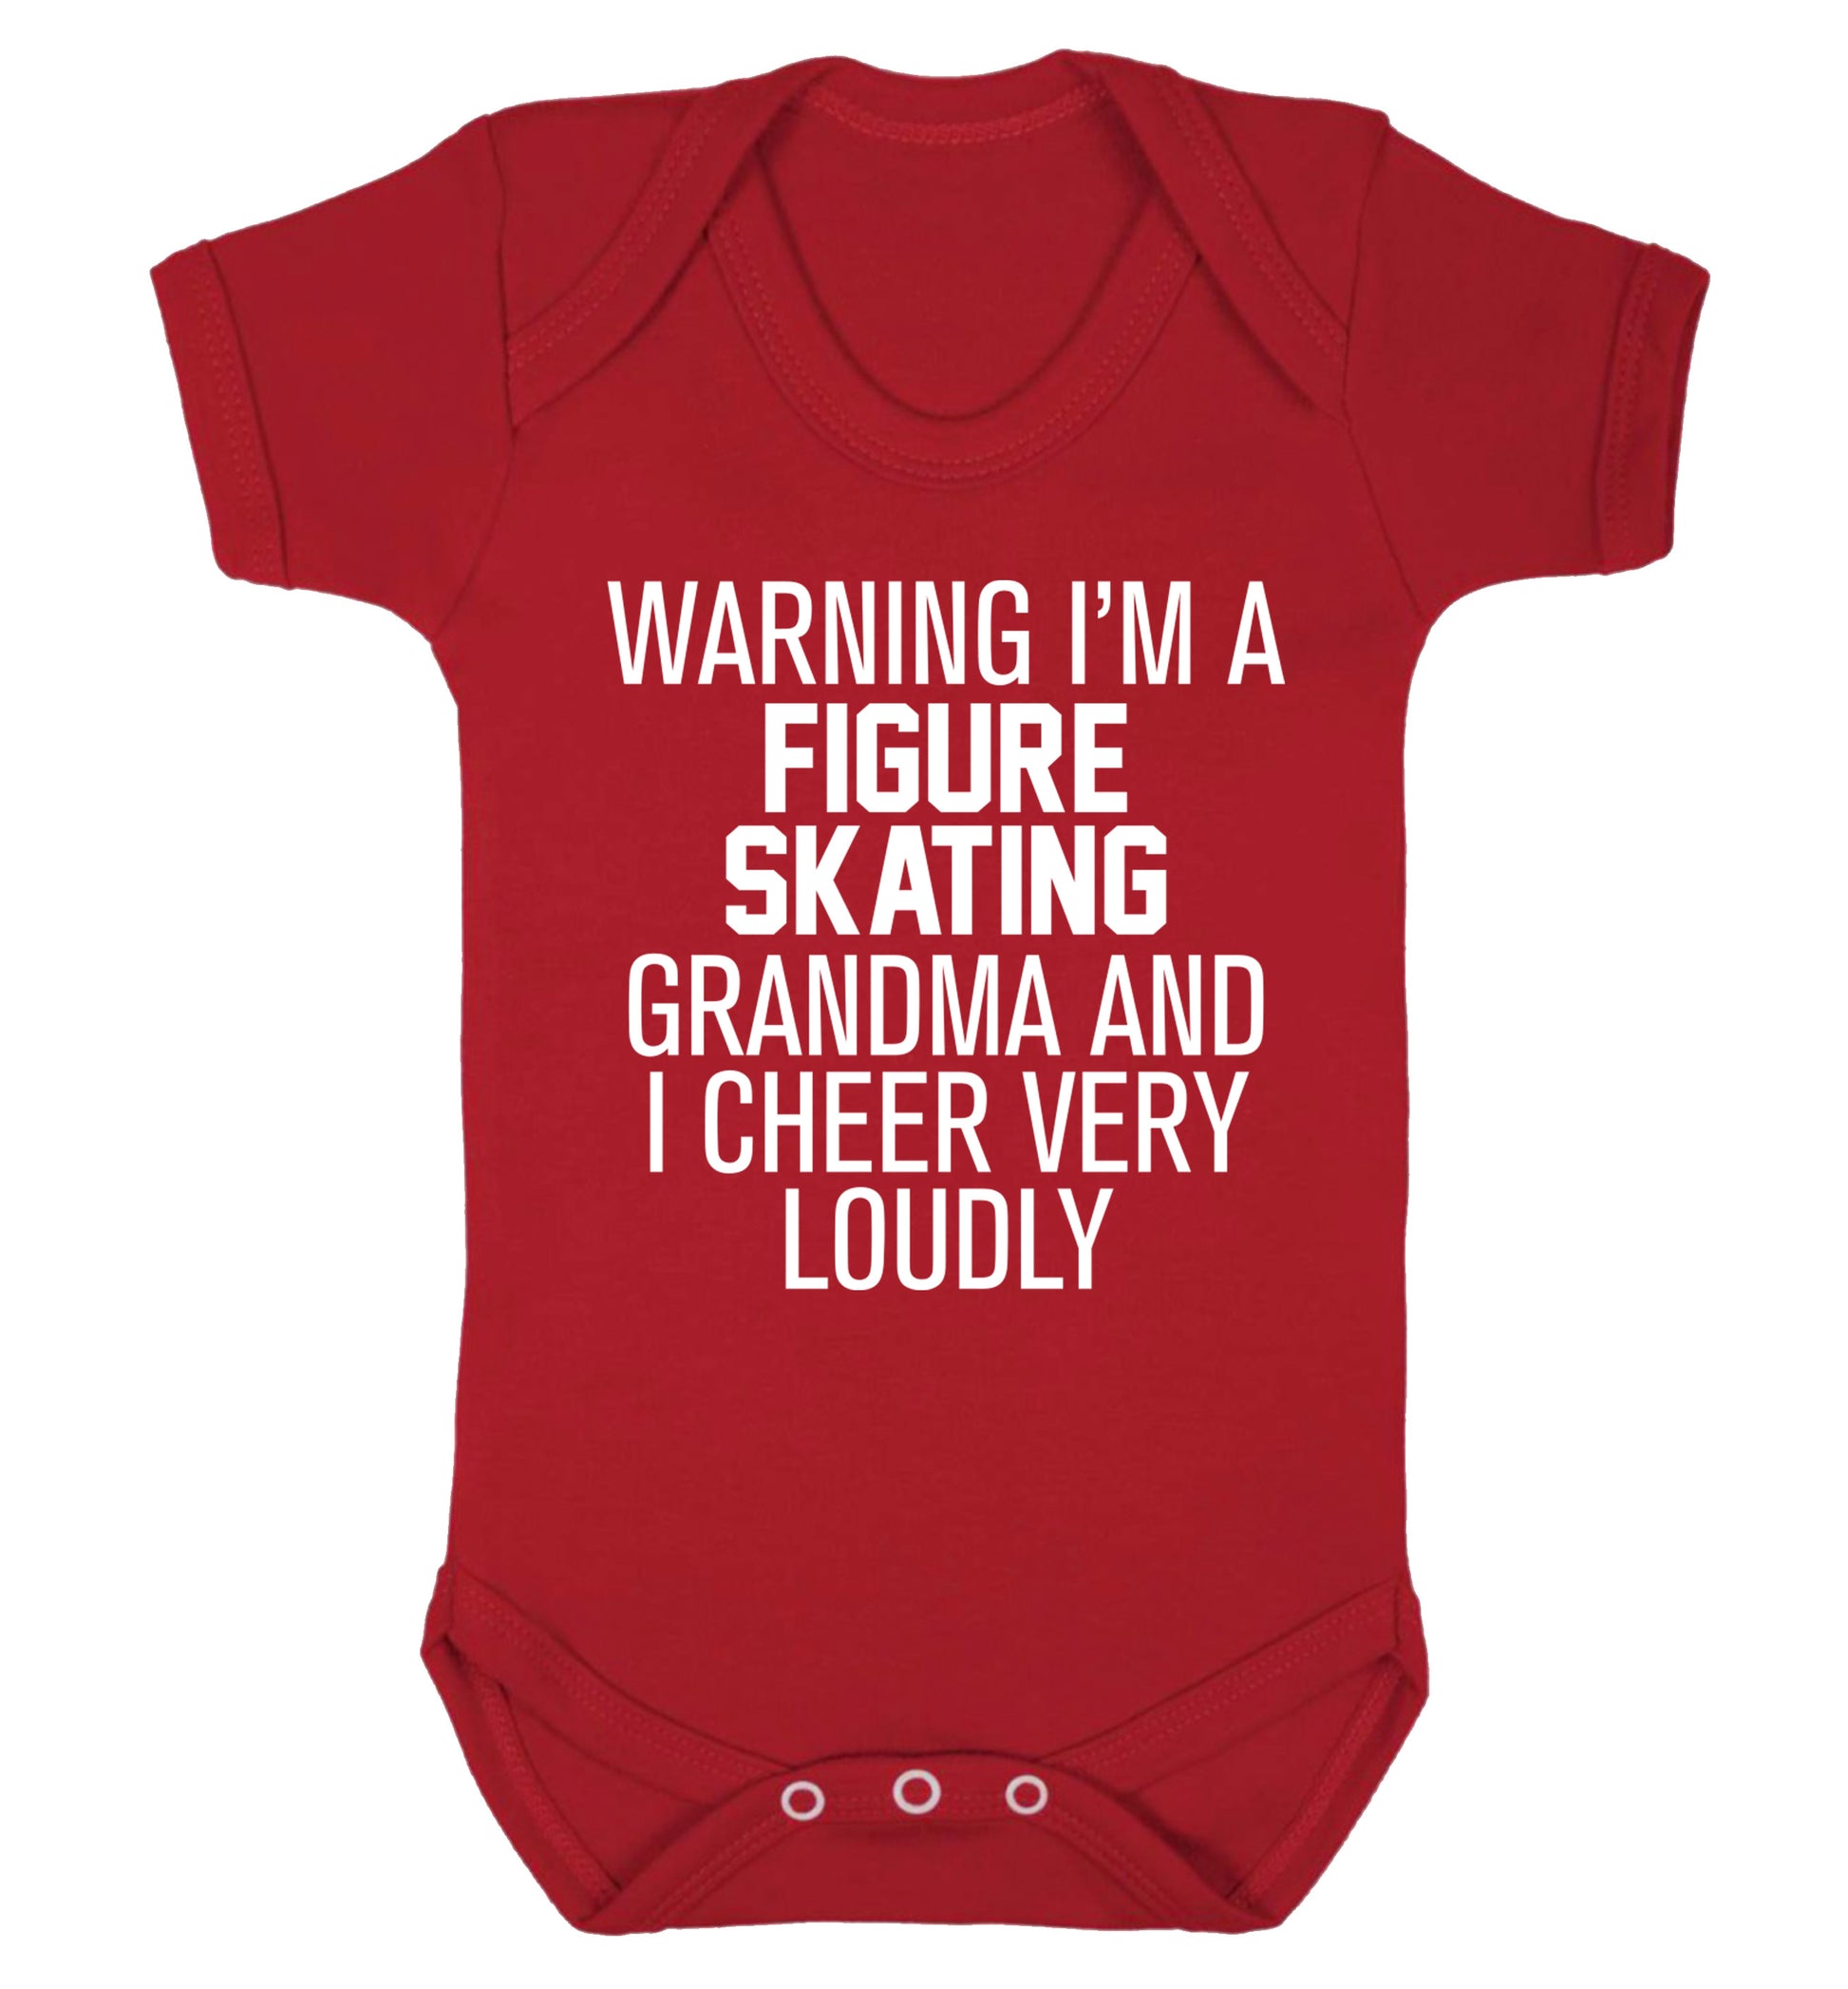 Warning I'm a figure skating grandma and I cheer very loudly Baby Vest red 18-24 months